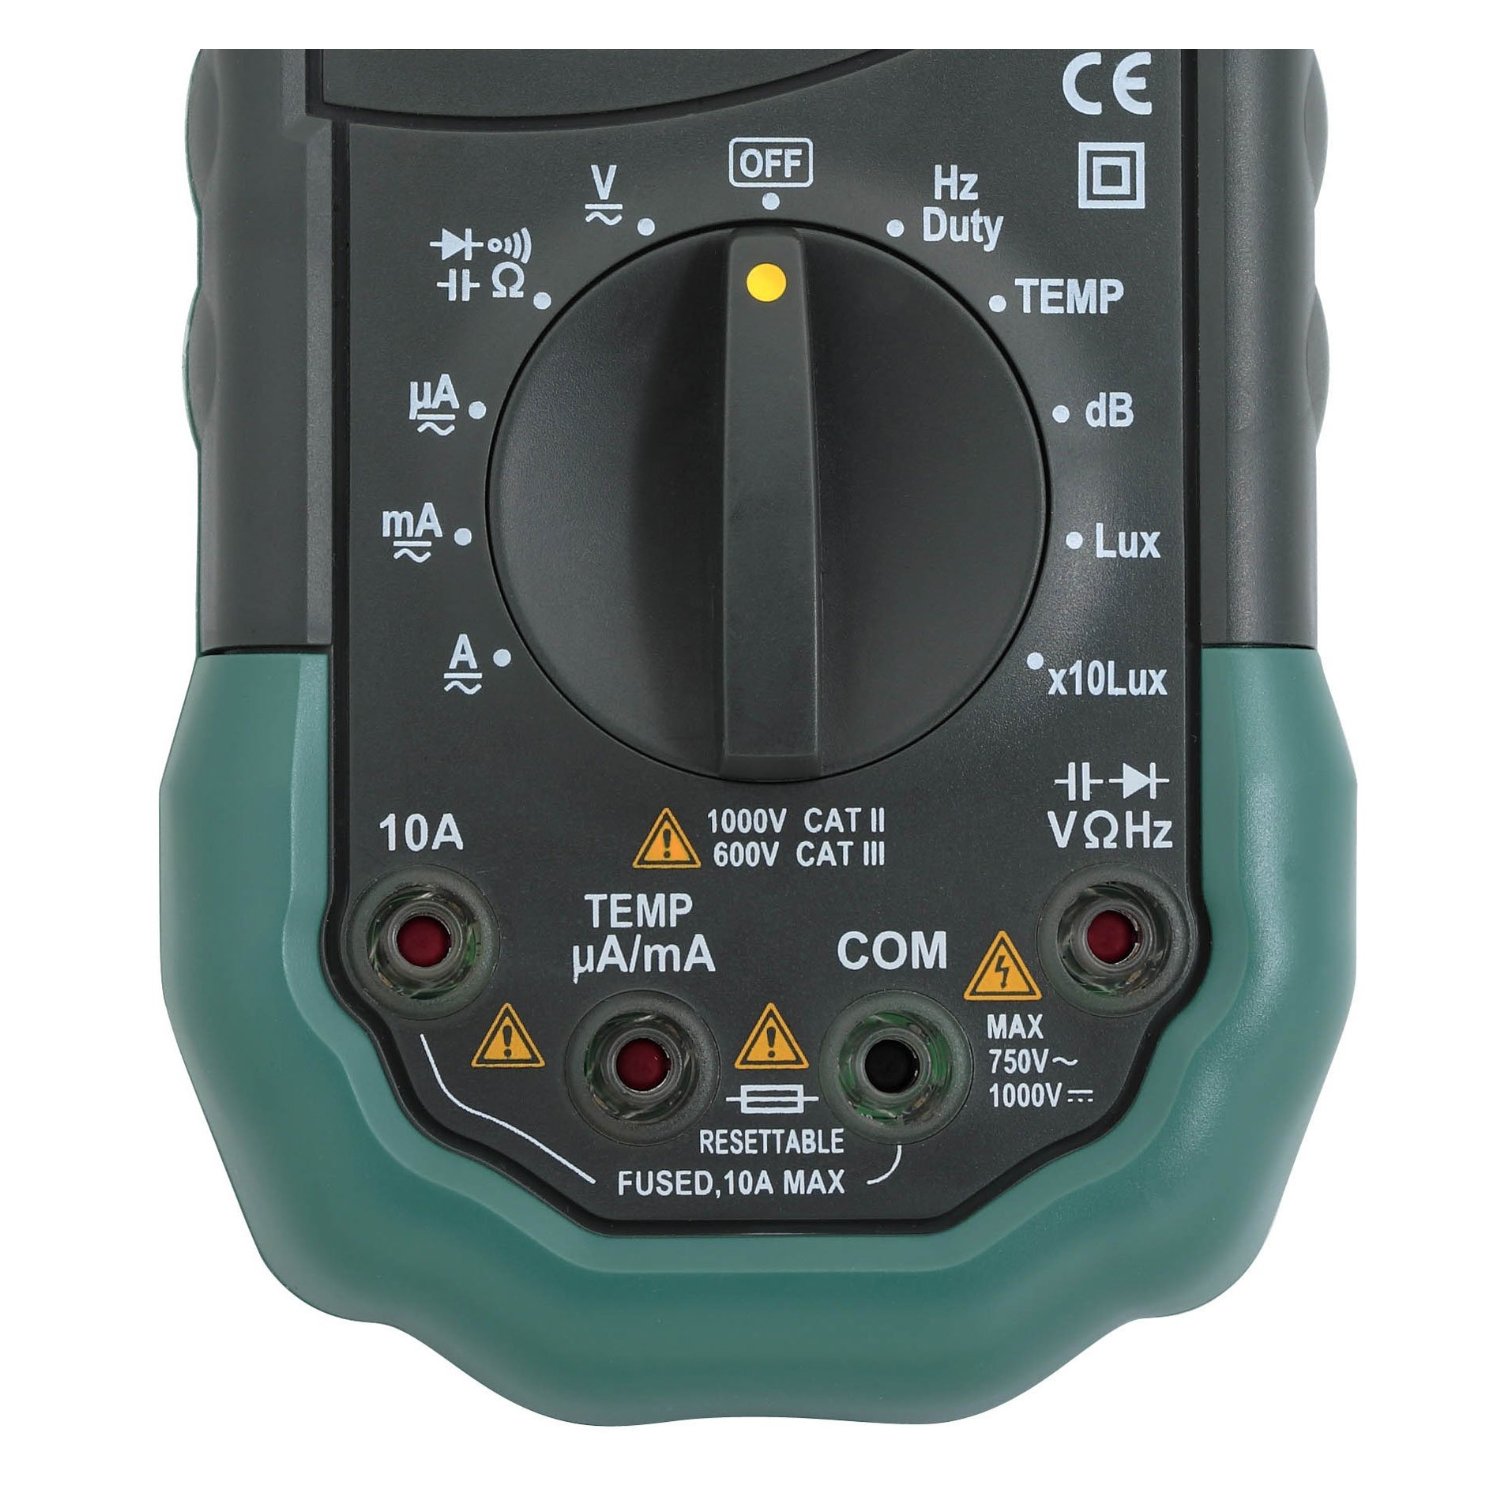 Mastech MS8229 Auto-Range 5-in-1 Multi-functional Digital Multimeter - The function selector.